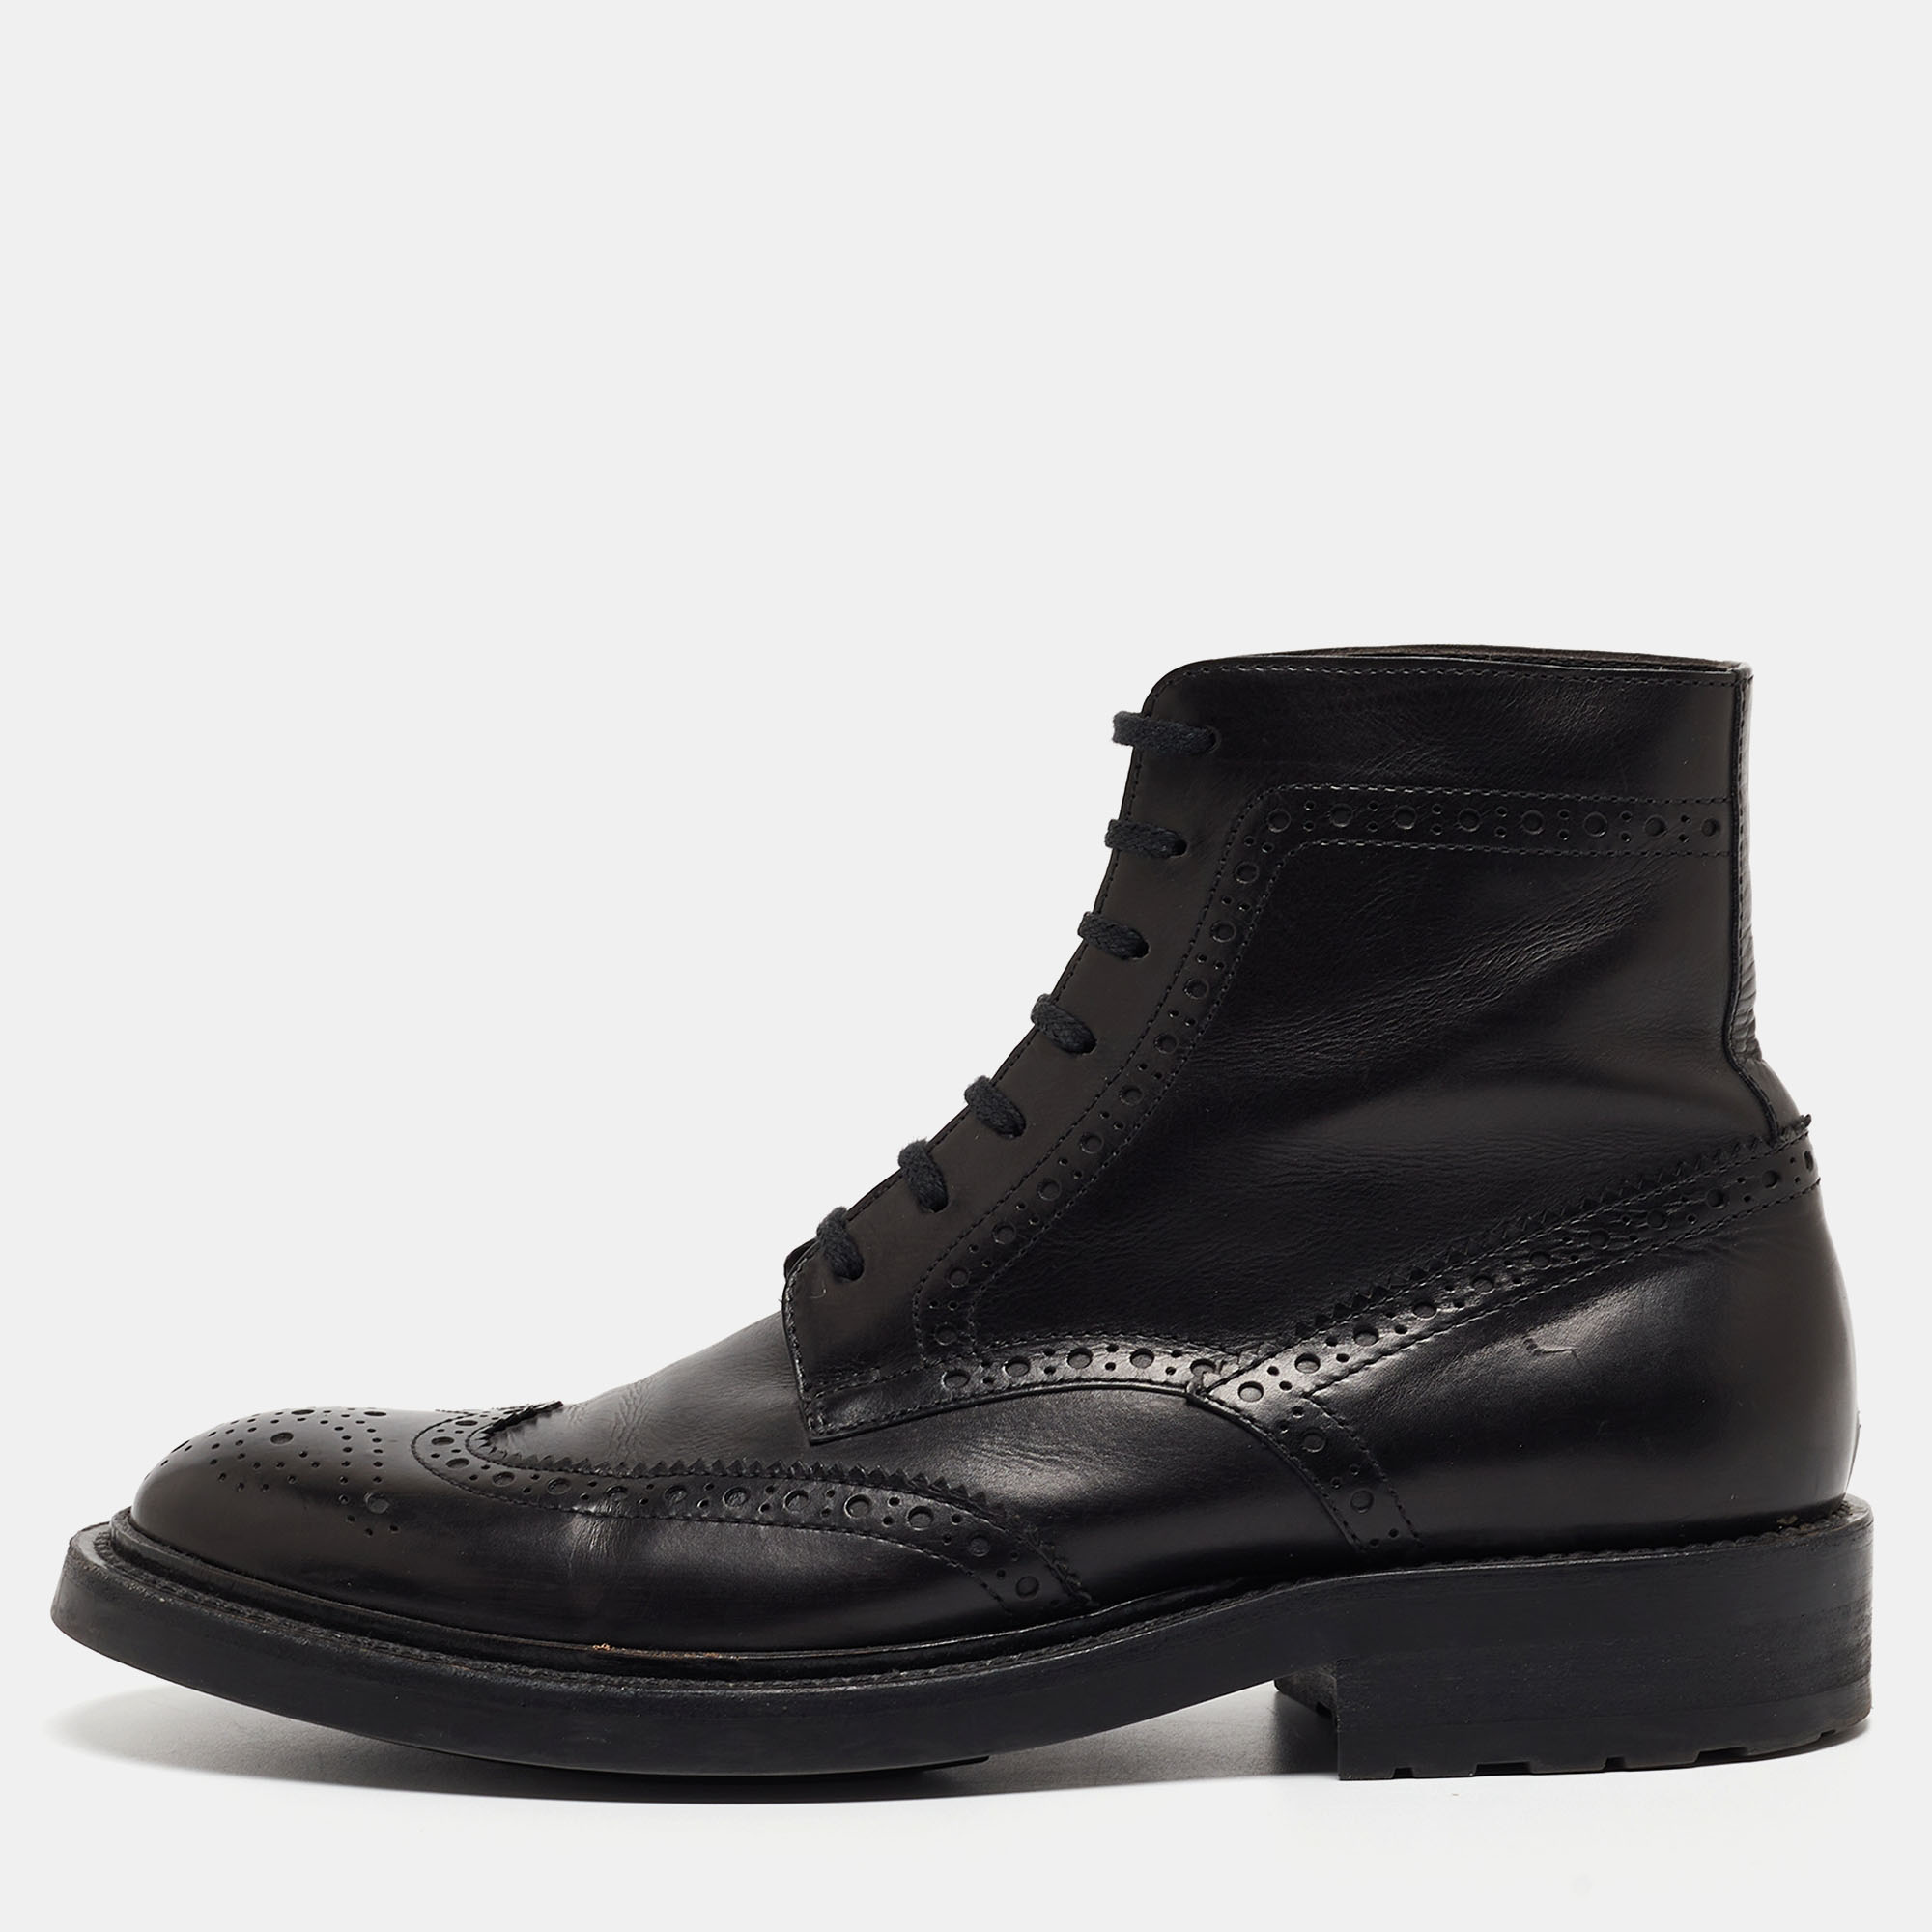 Pre-owned Saint Laurent Black Brogue Leather Ankle Boots Size 38